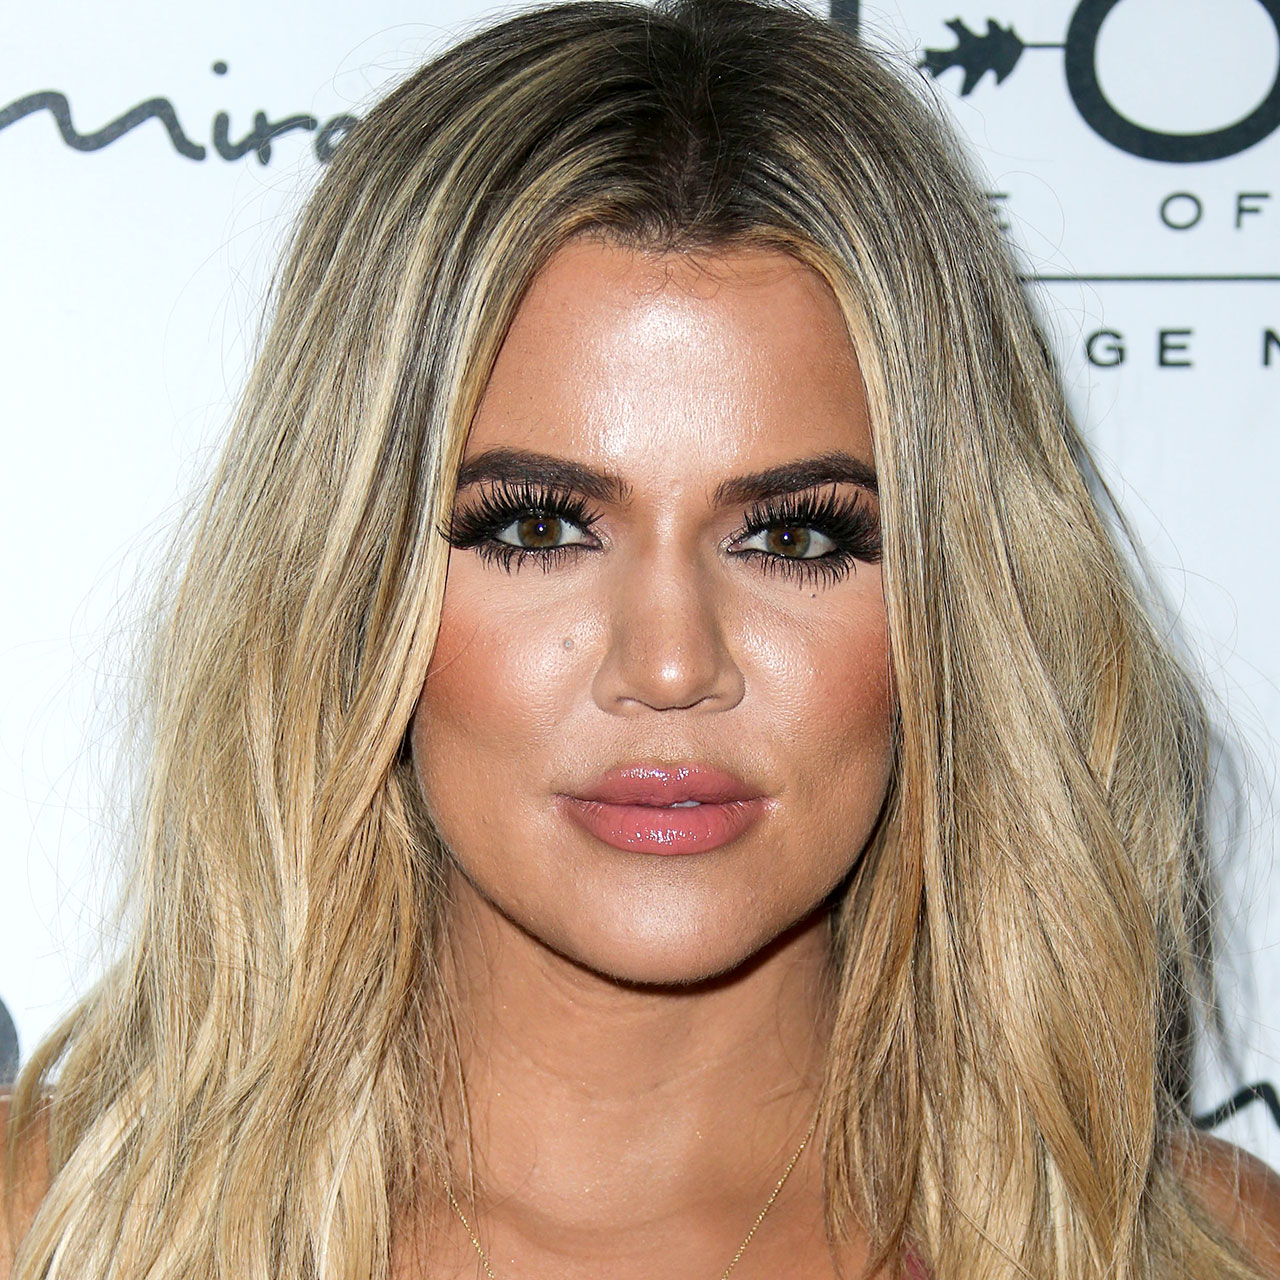 Fans Applaud Khloé Kardashian's 'Healthier' Weight Gain In New Pictures:  'She Looks So Much Better!' - SHEfinds